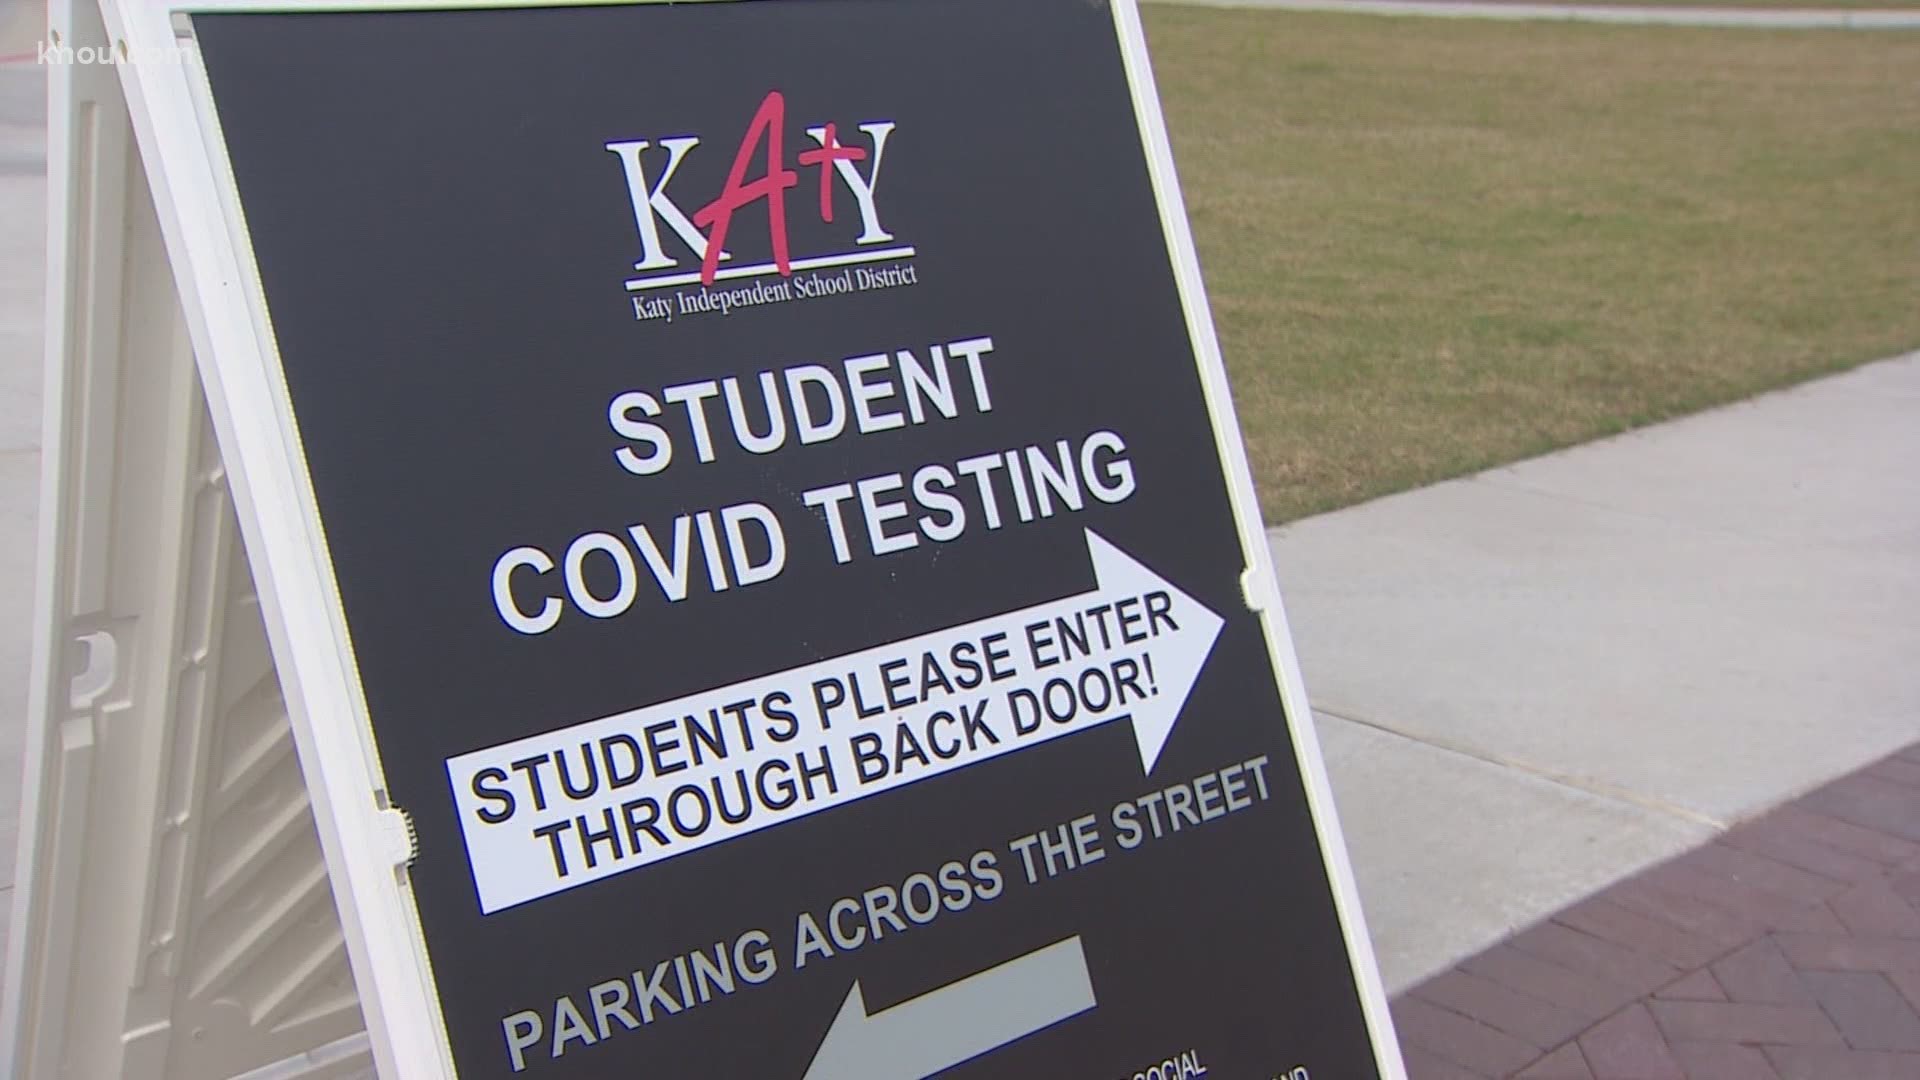 Students enrolled in the Katy Independent School District will be able to get a rapid COVID-19 test for free starting Friday.